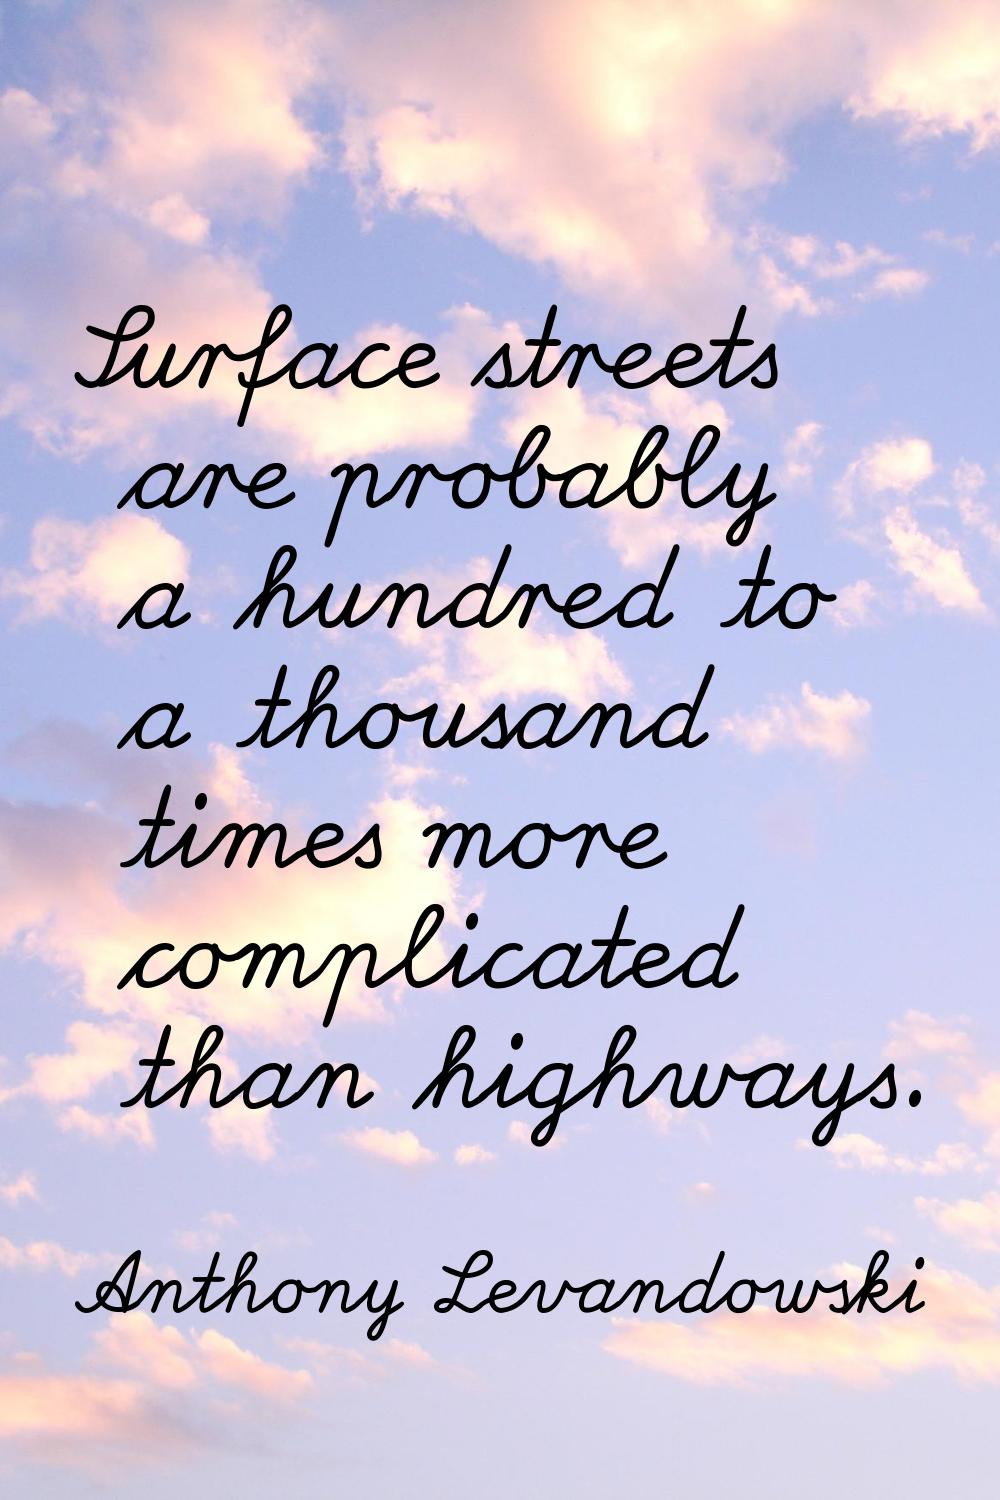 Surface streets are probably a hundred to a thousand times more complicated than highways.